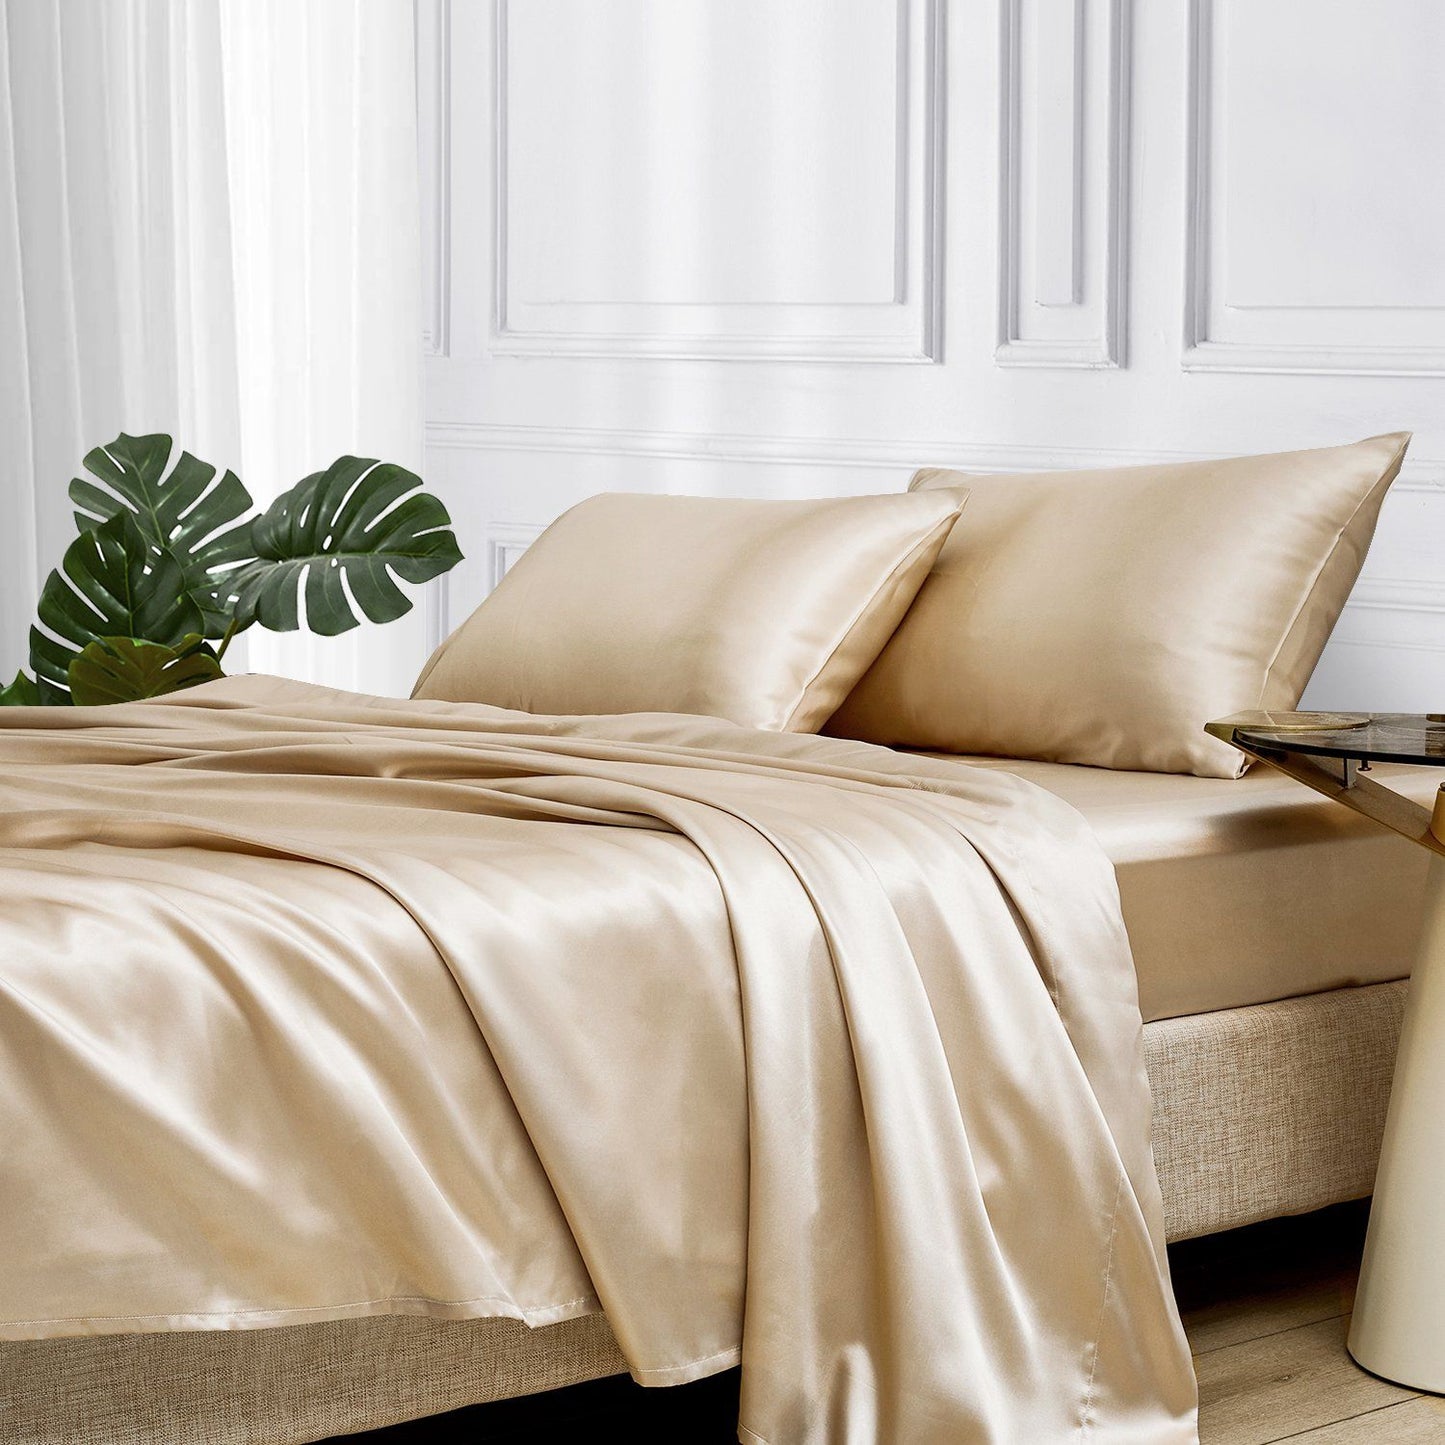 Mr&hm Taupe Satin Bed Sheets, Full Size 4 Pcs Silky Bedding Set New